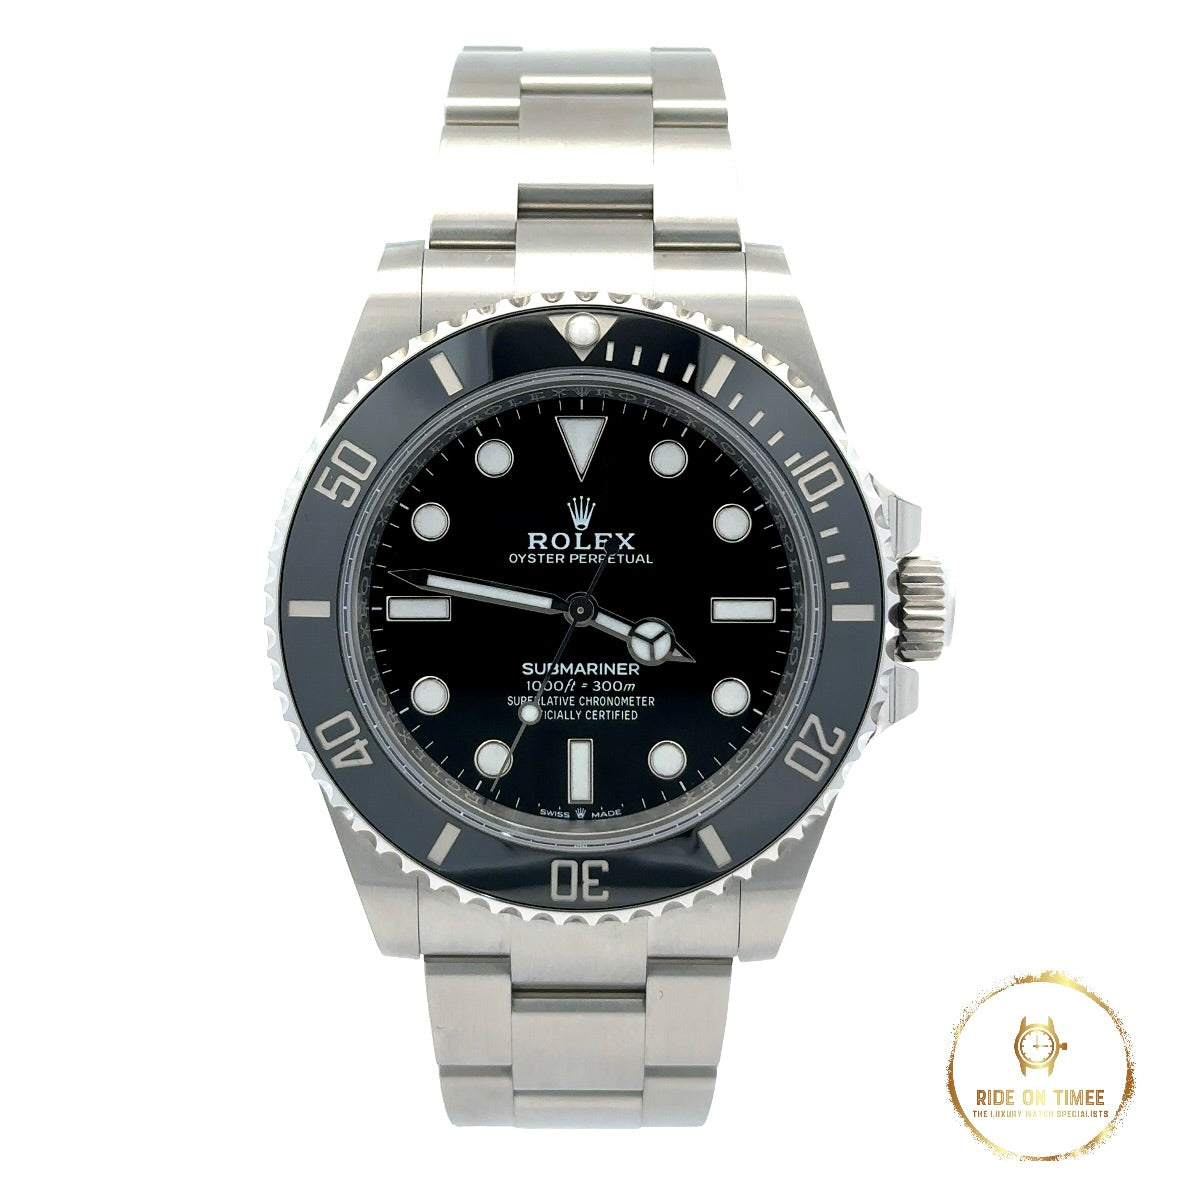 Rolex Submariner Non Date 41  ‘124060’ - Ride On Timee